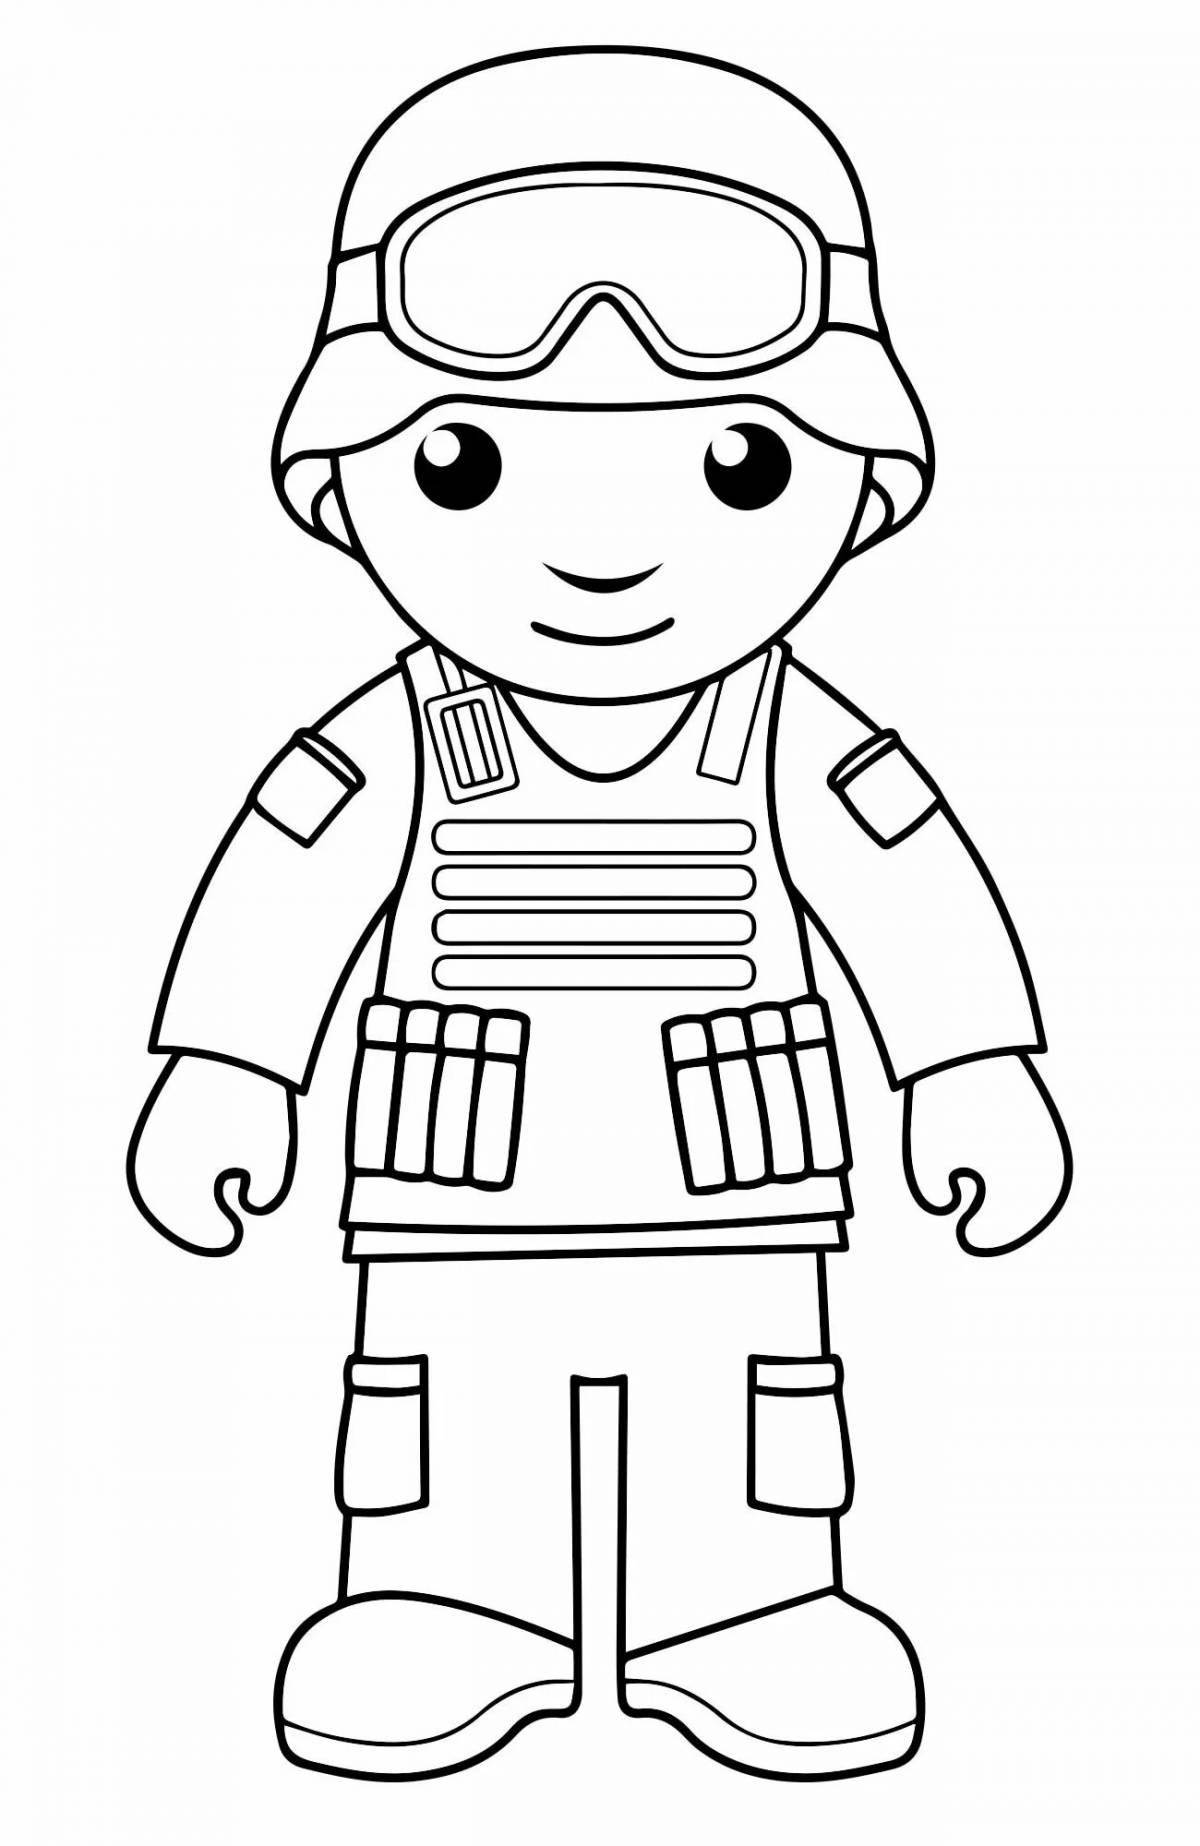 Coloring book gallant soldier for kids